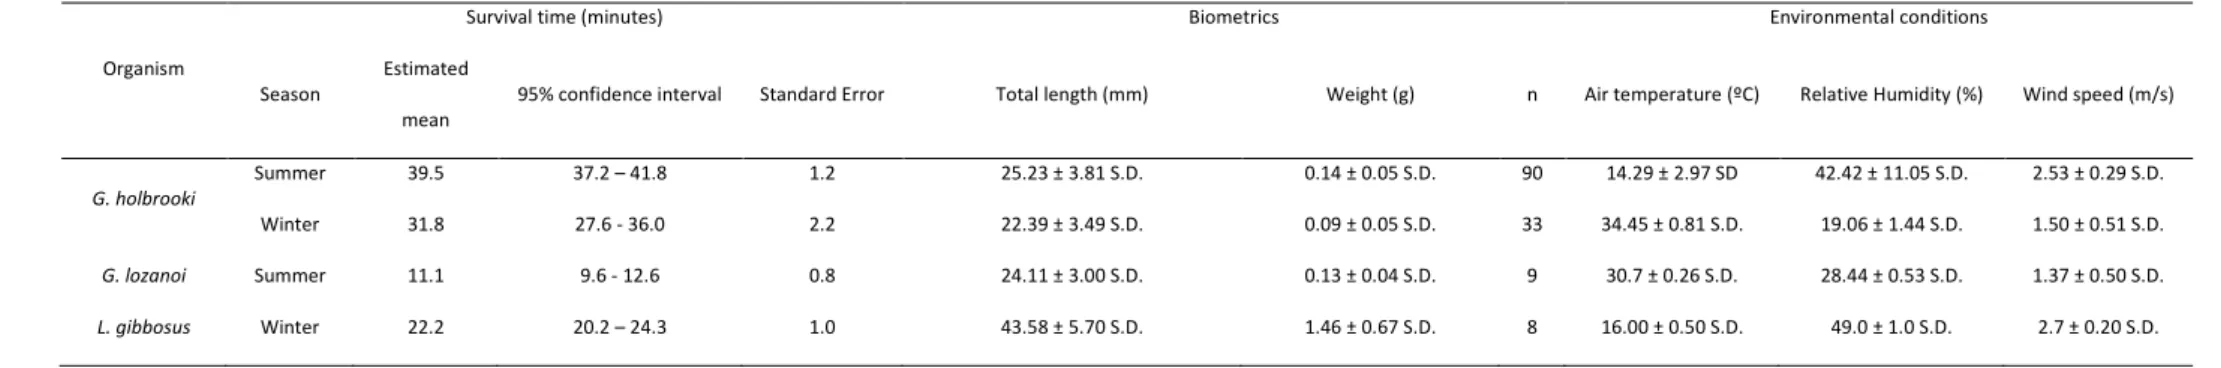 Table 2. Estimated mean fish desiccation survival time (in minutes) given by a Kaplan-Meier analysis